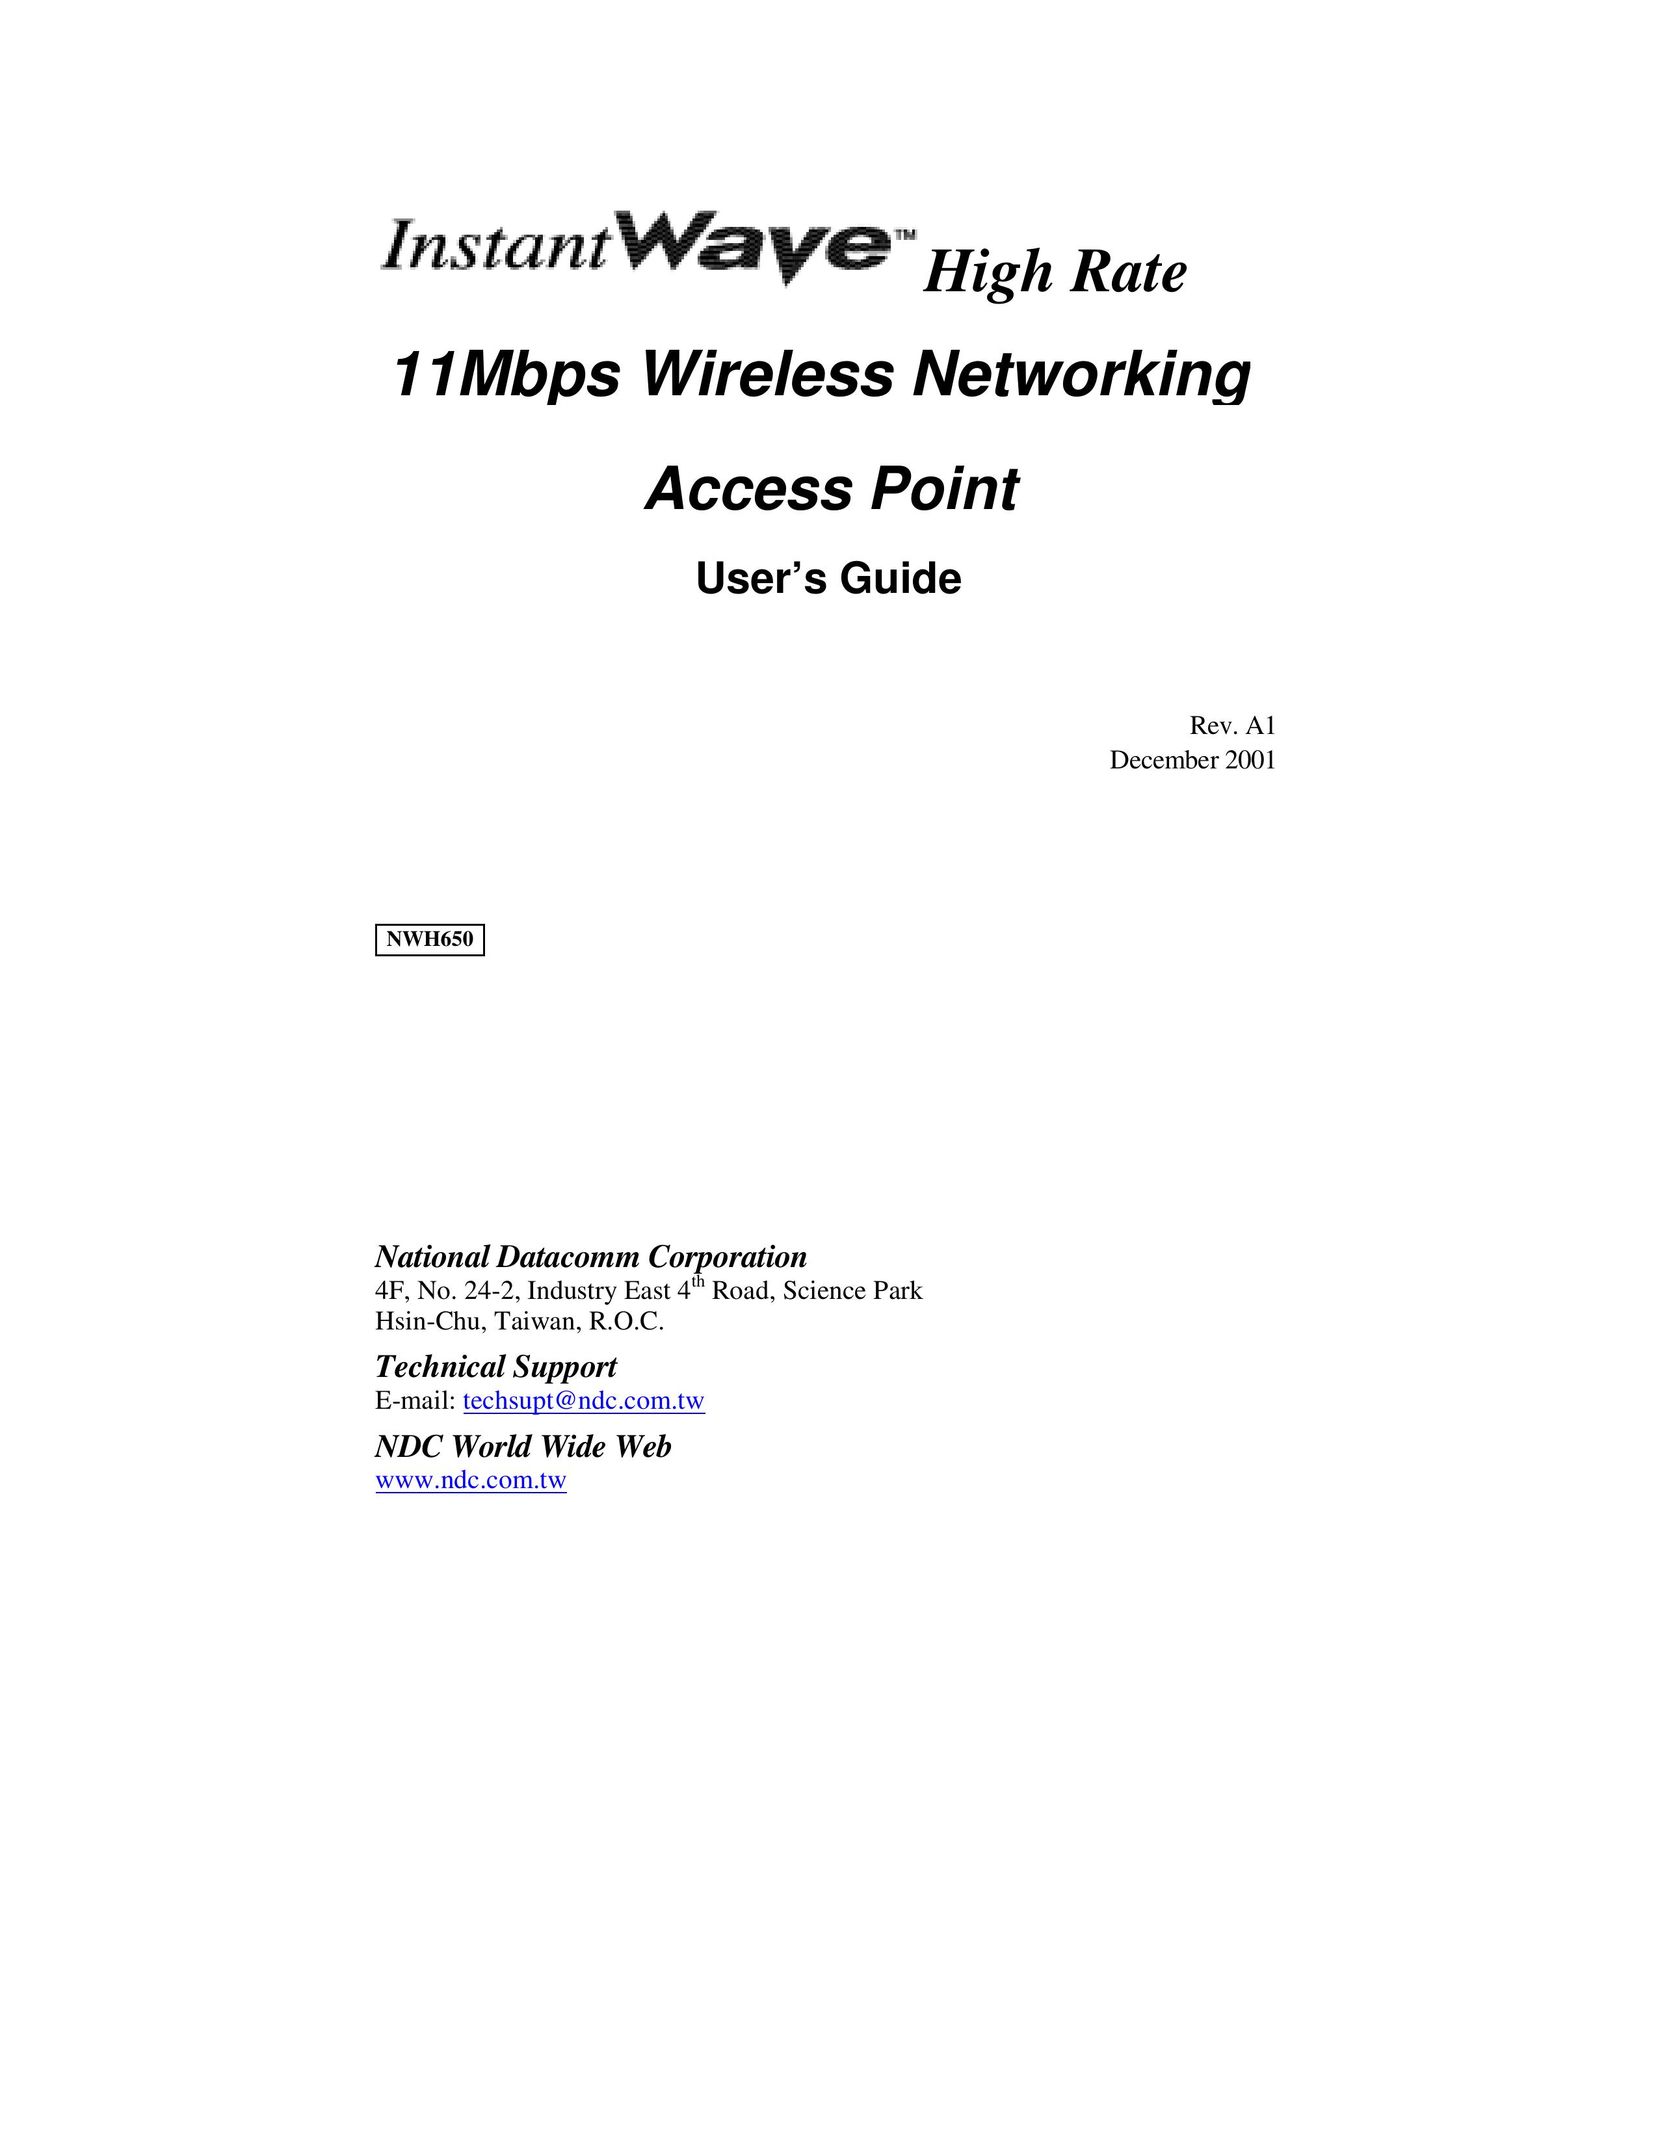 NDC comm NWH650 Network Router User Manual